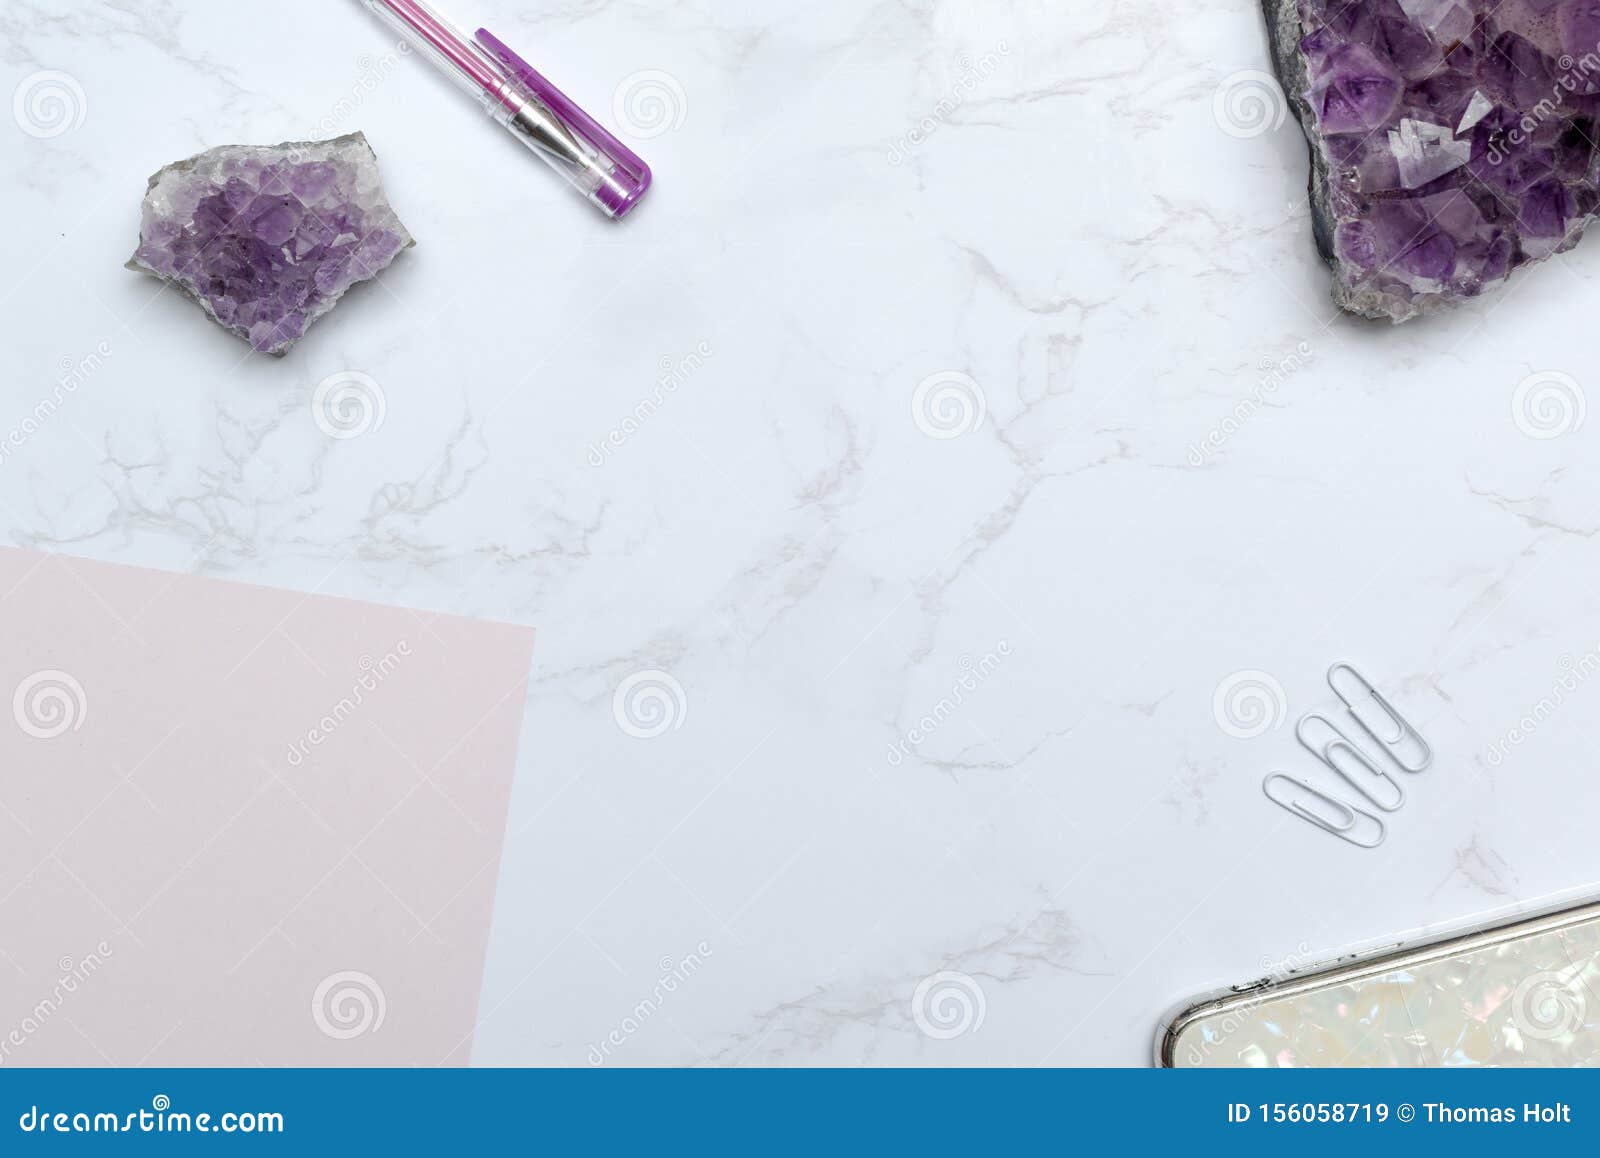 Purple Themed Stationary Set With Notebook And Pen On A Modern